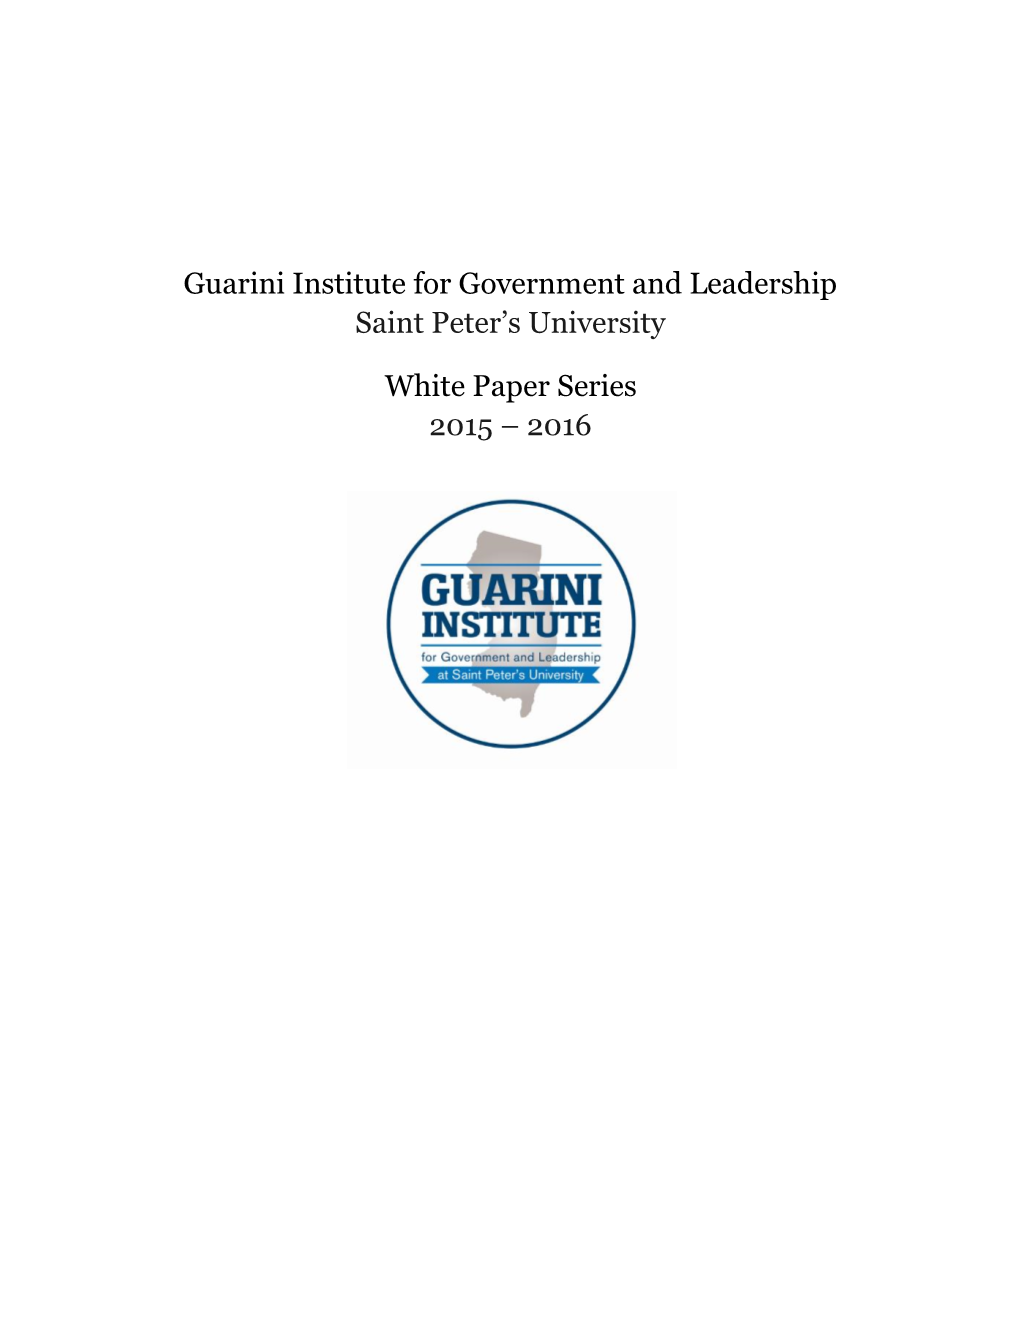 Guarini Institute for Government and Leadership Saint Peter’S University